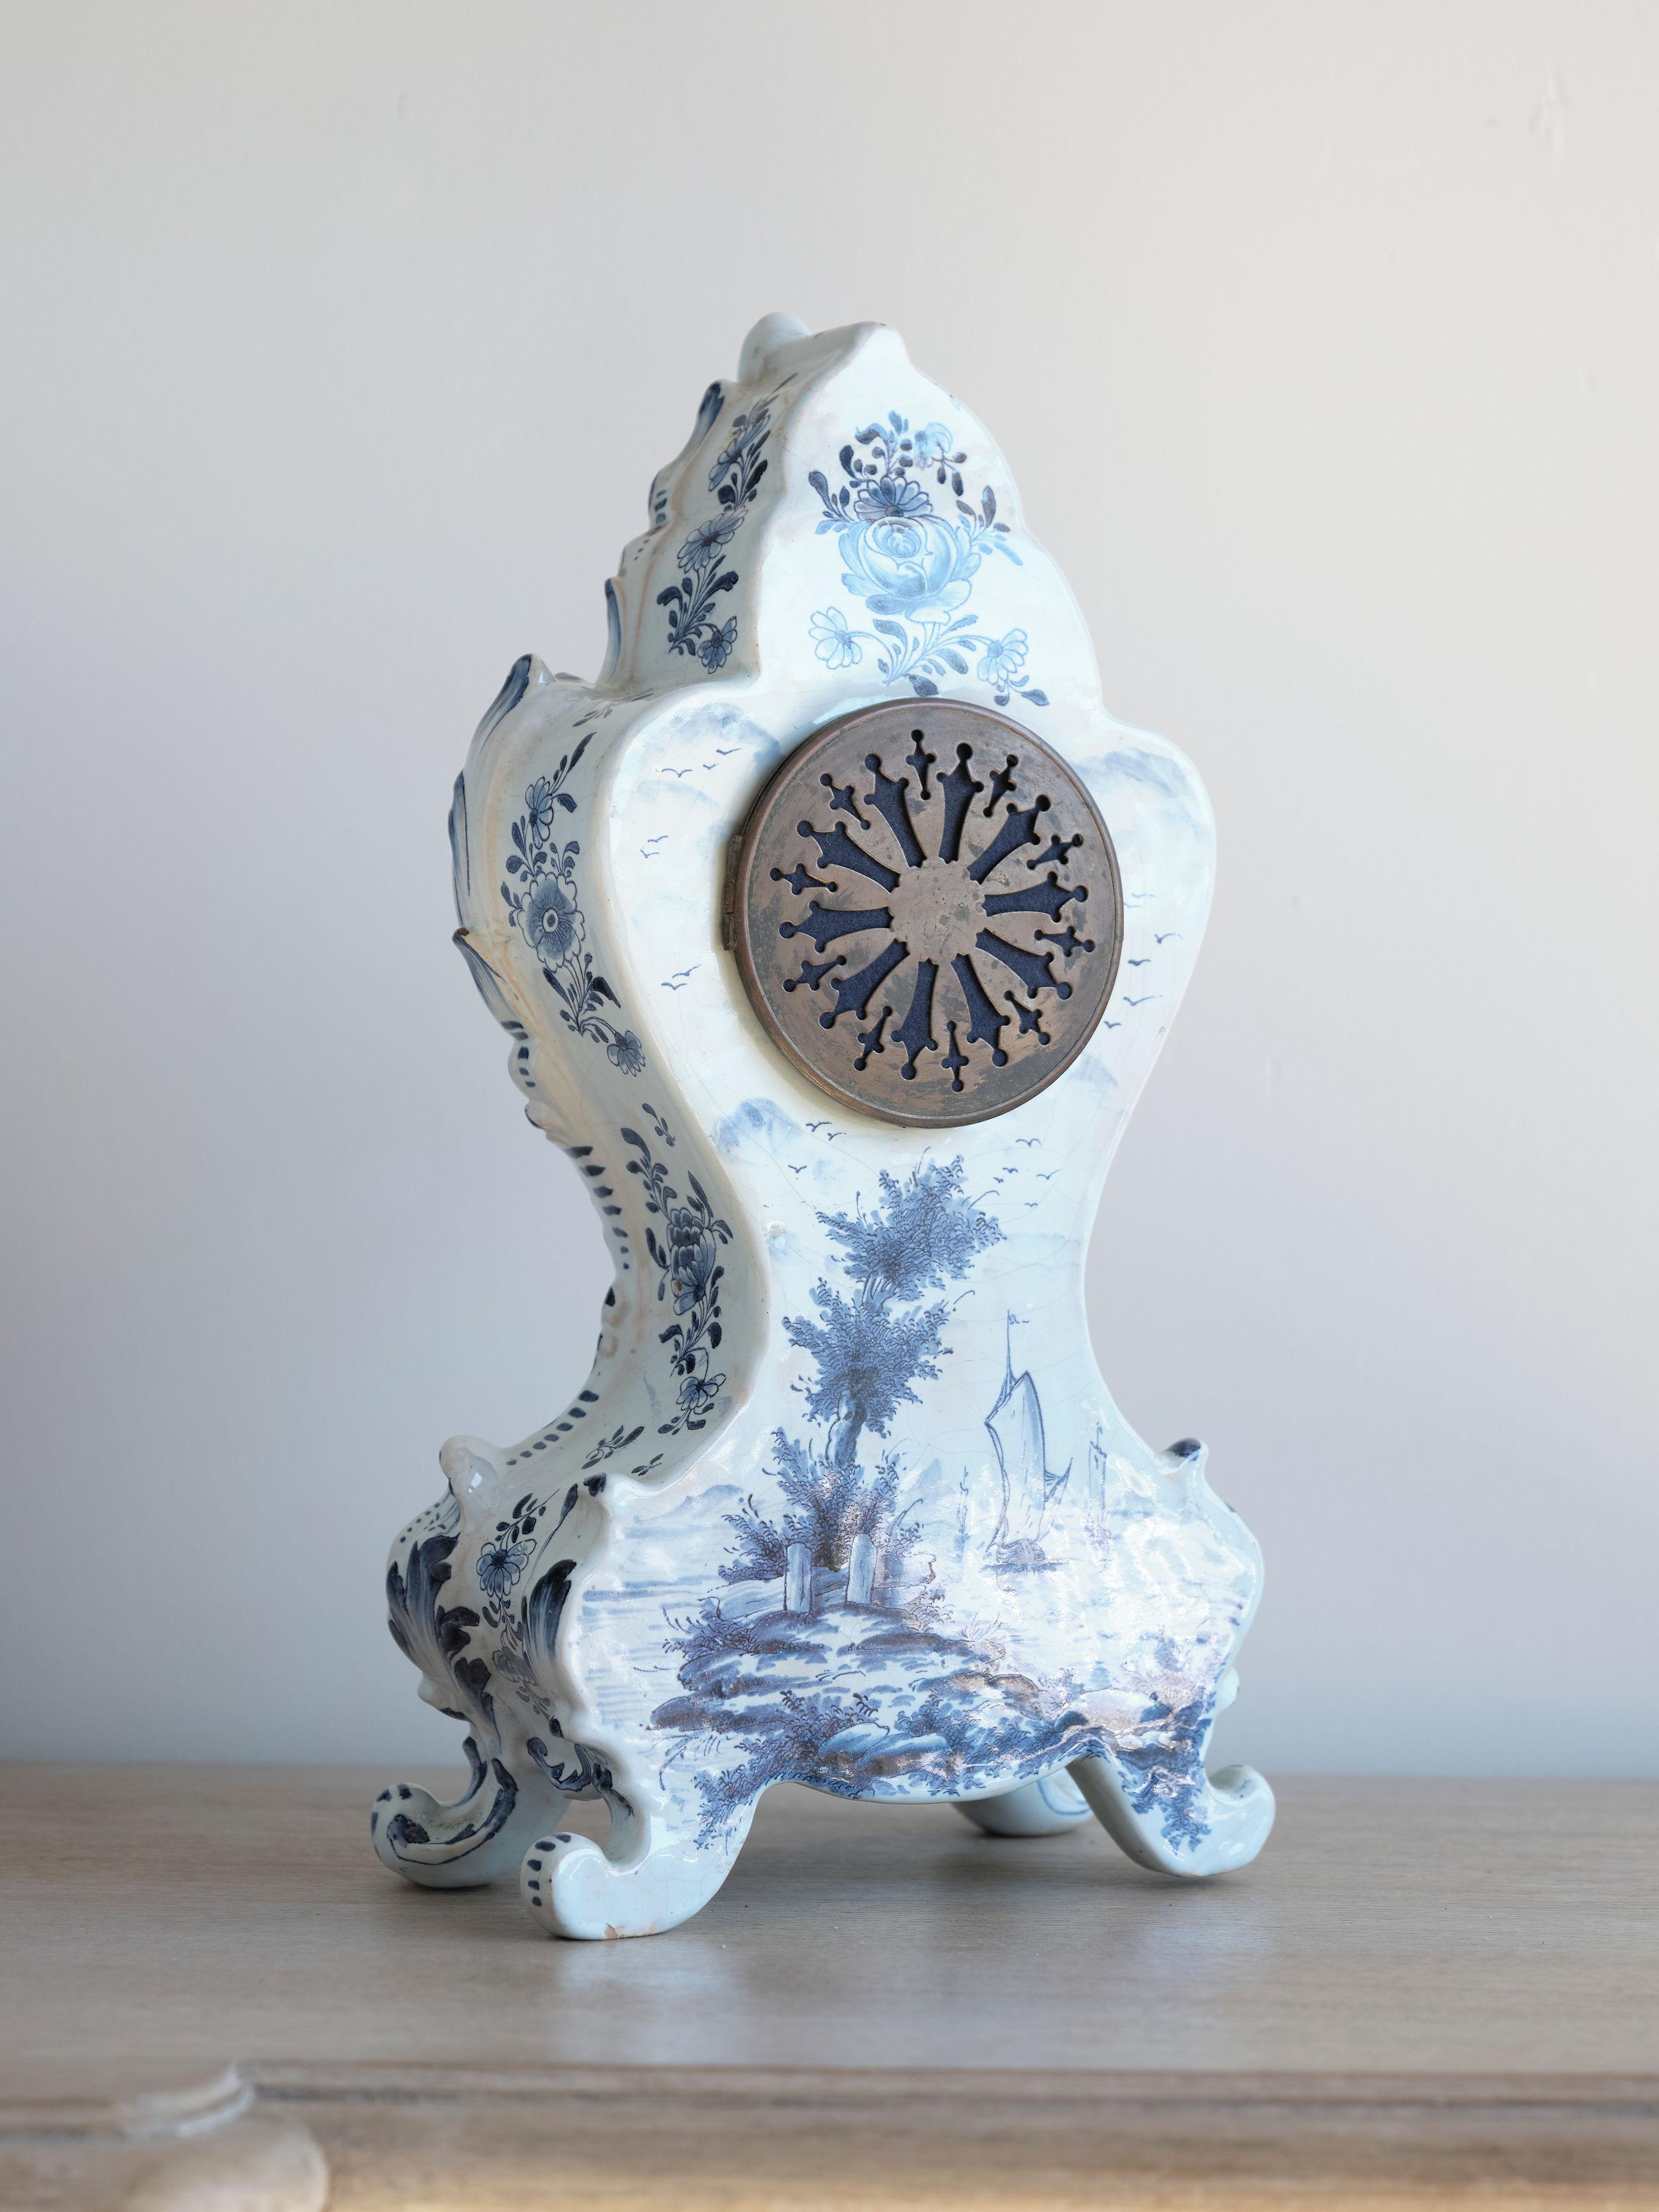 Keep time in your office or home with this charming blue and white 19th Century Delft Clock. Crafted in the Netherlands in the 1800s, this working porcelain piece stands on 4 legs and includes the original pendulum and hardware. Pendulum and winding